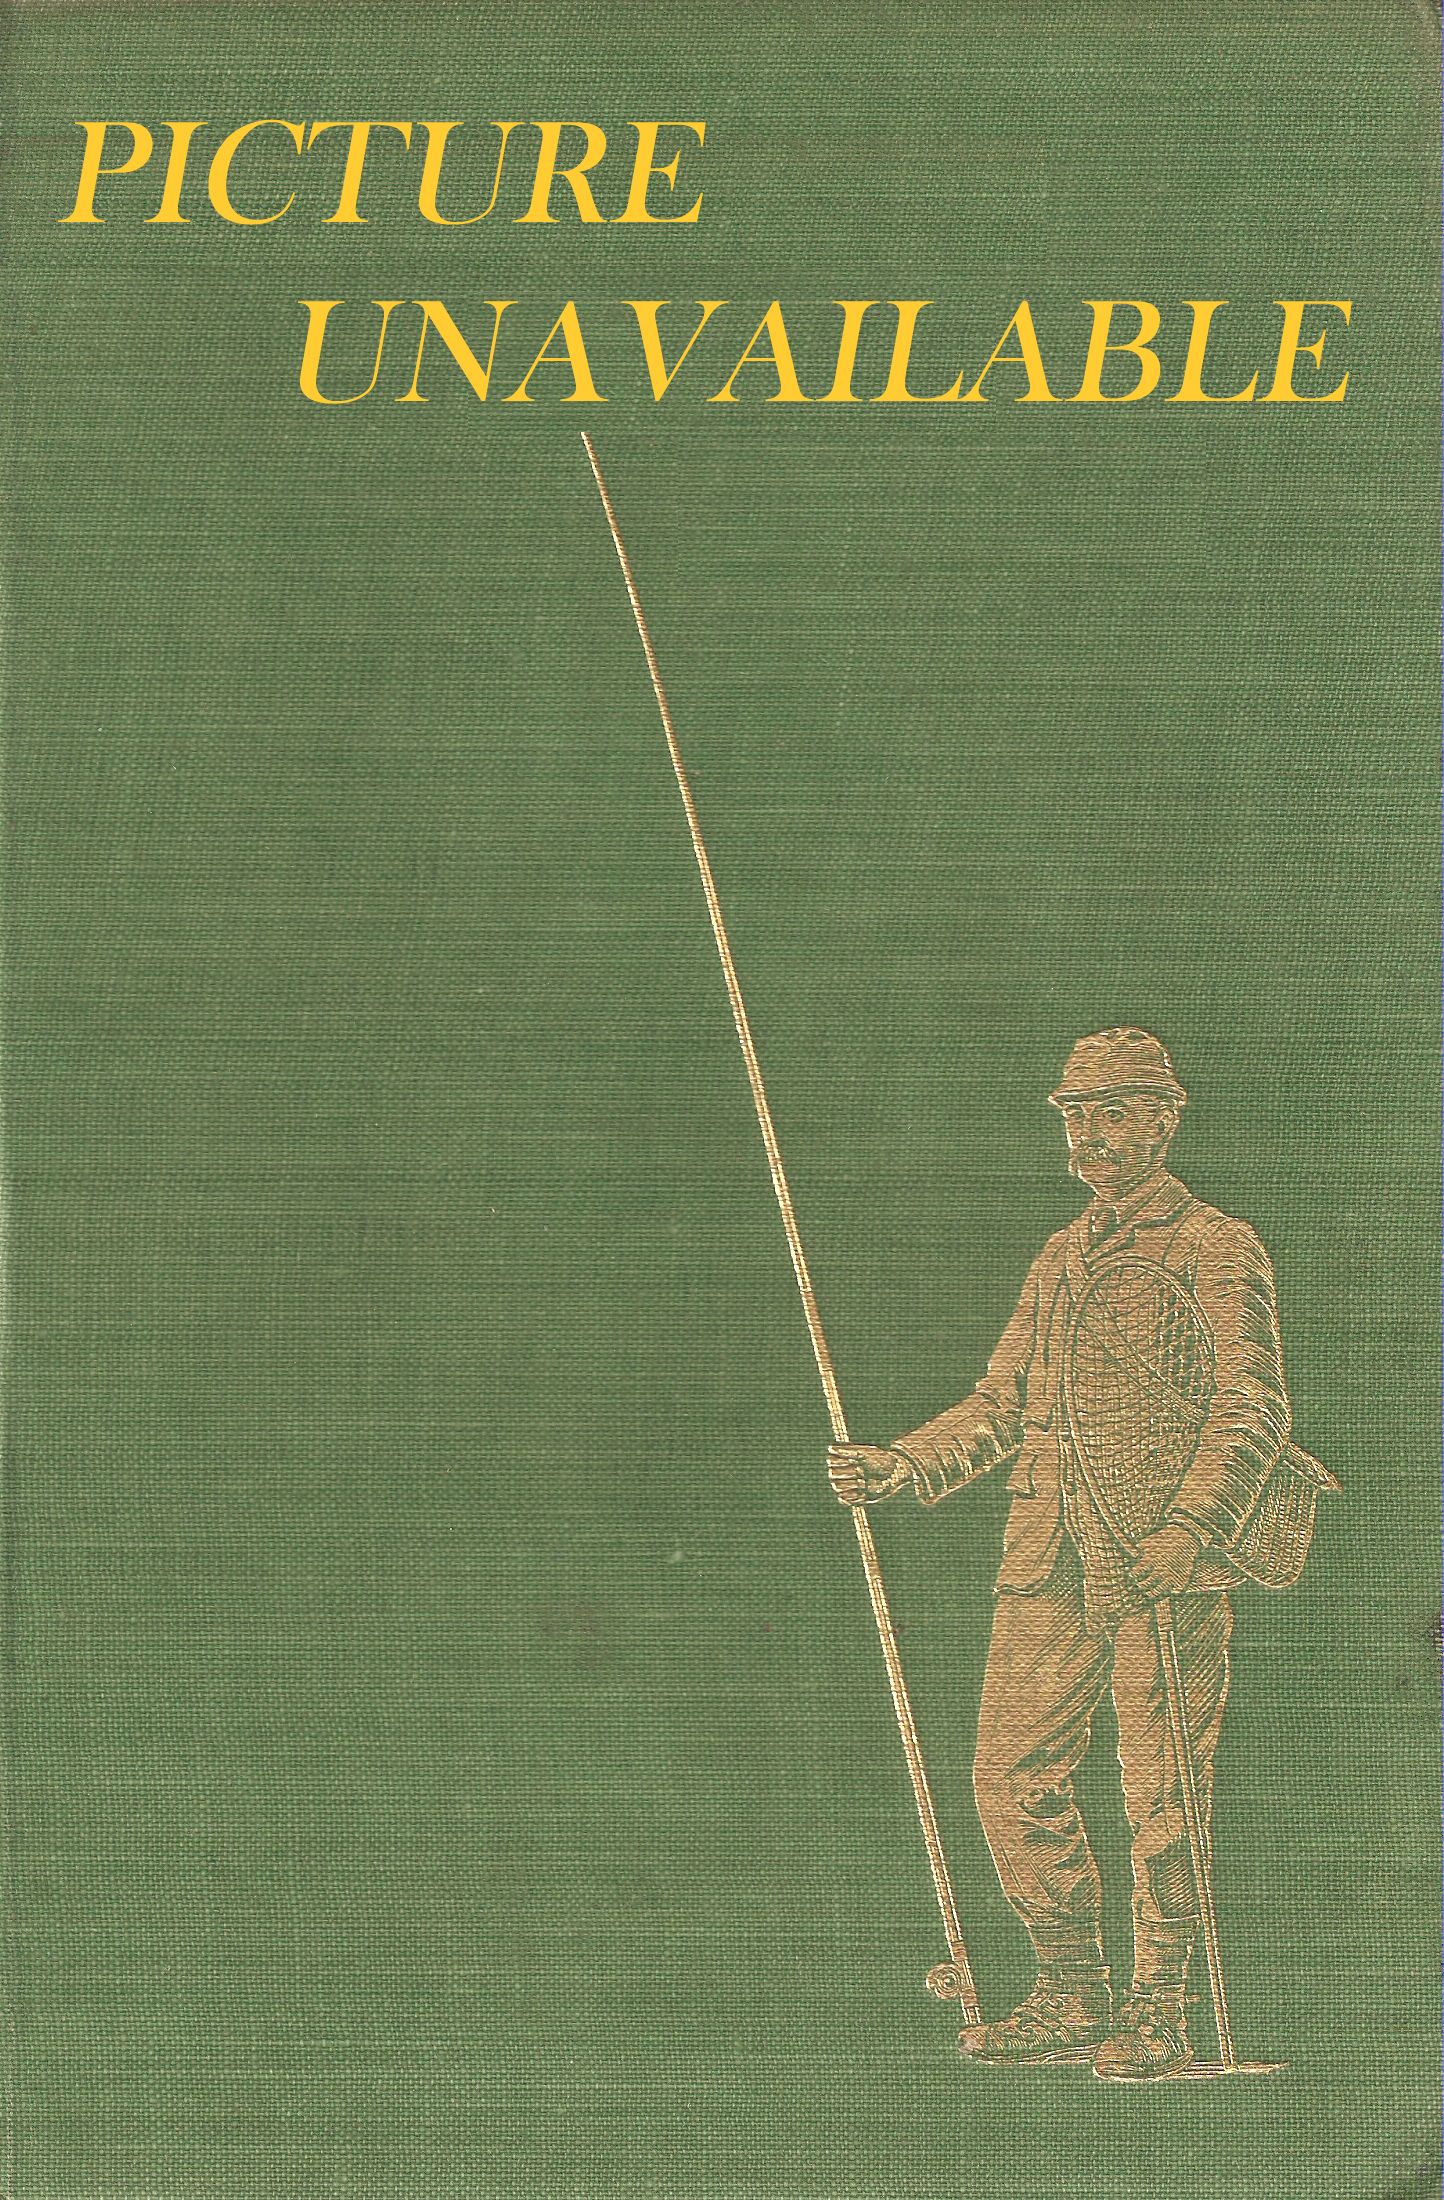 ANGLING IN OUSE AND CAM WATERS: An illustrated handbook for anglers  descriptive of the River Great Ouse, its principal tributaries and  auxiliary waters. Edited by L.S. Marsh.